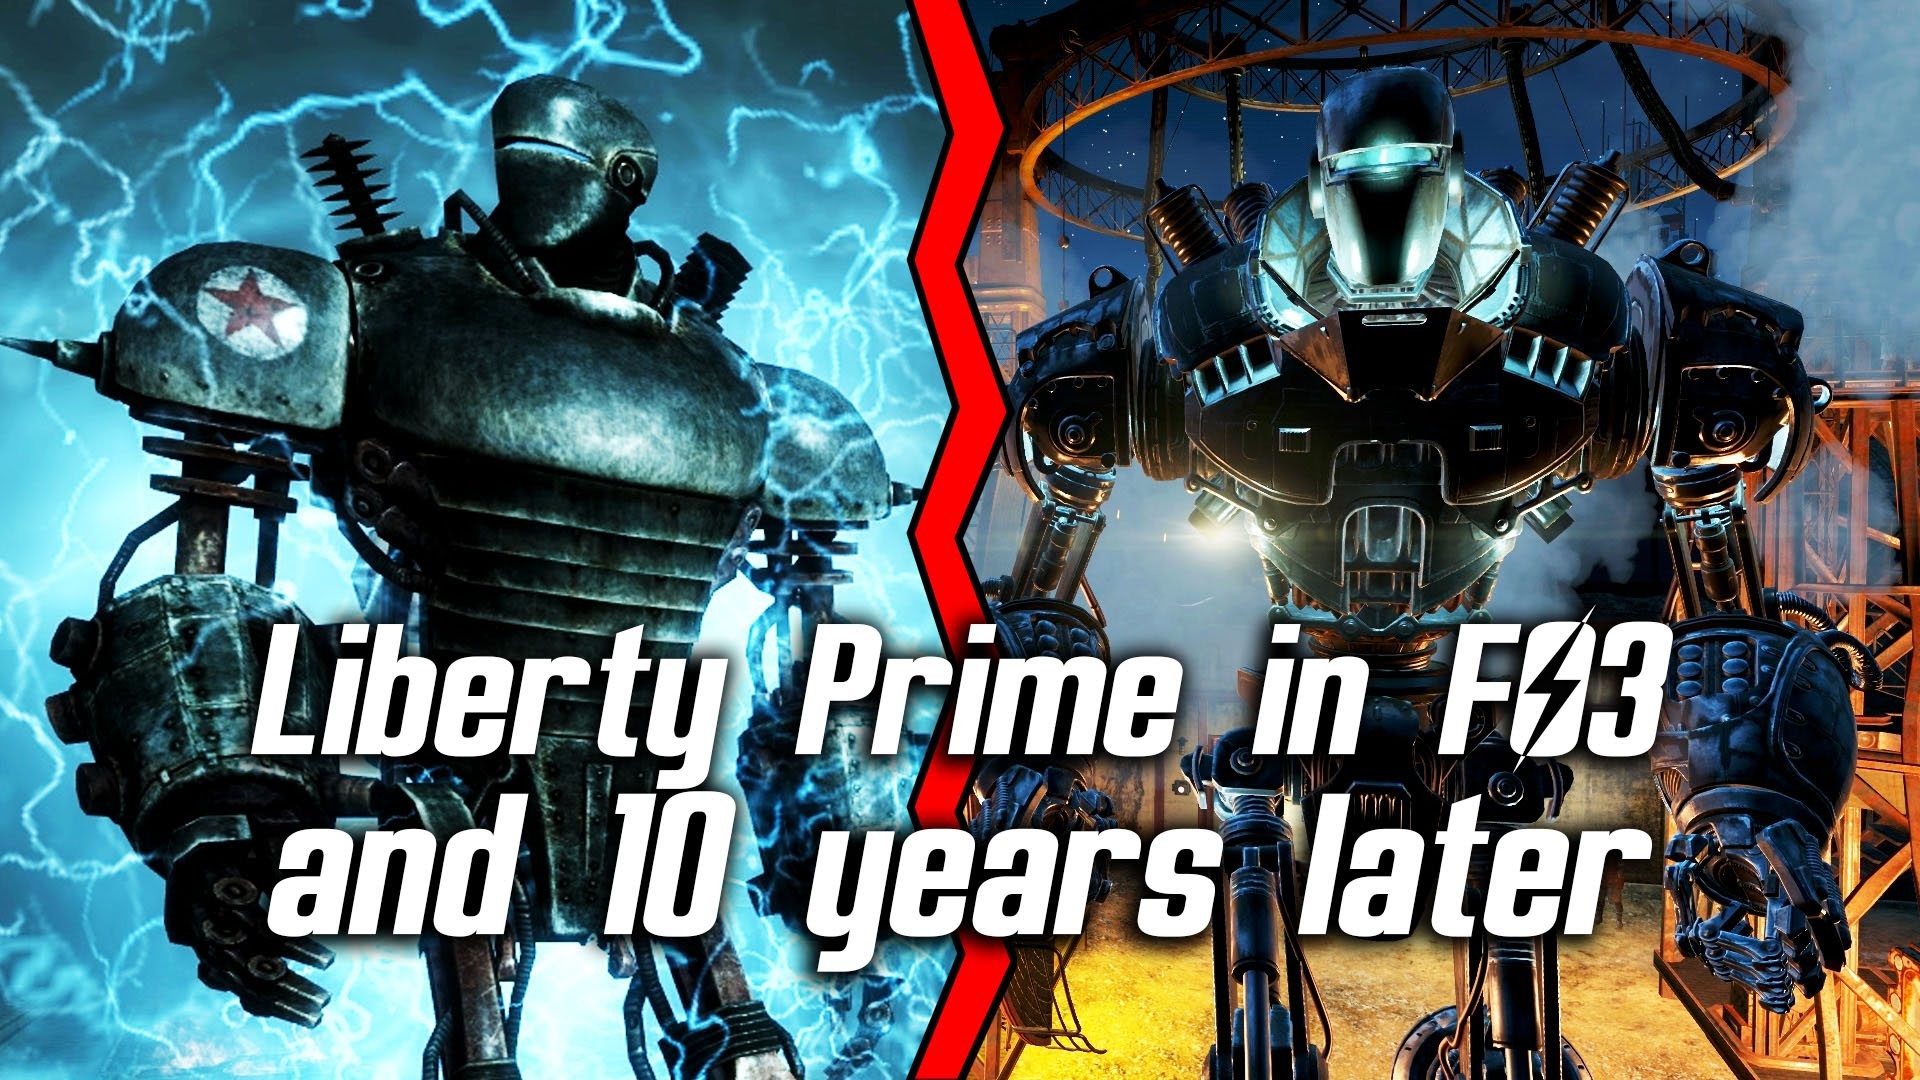 1920x1080 Fallout 4 - Liberty Prime in Fallout 3 and 10 years later in Fallout 4 -  YouTube